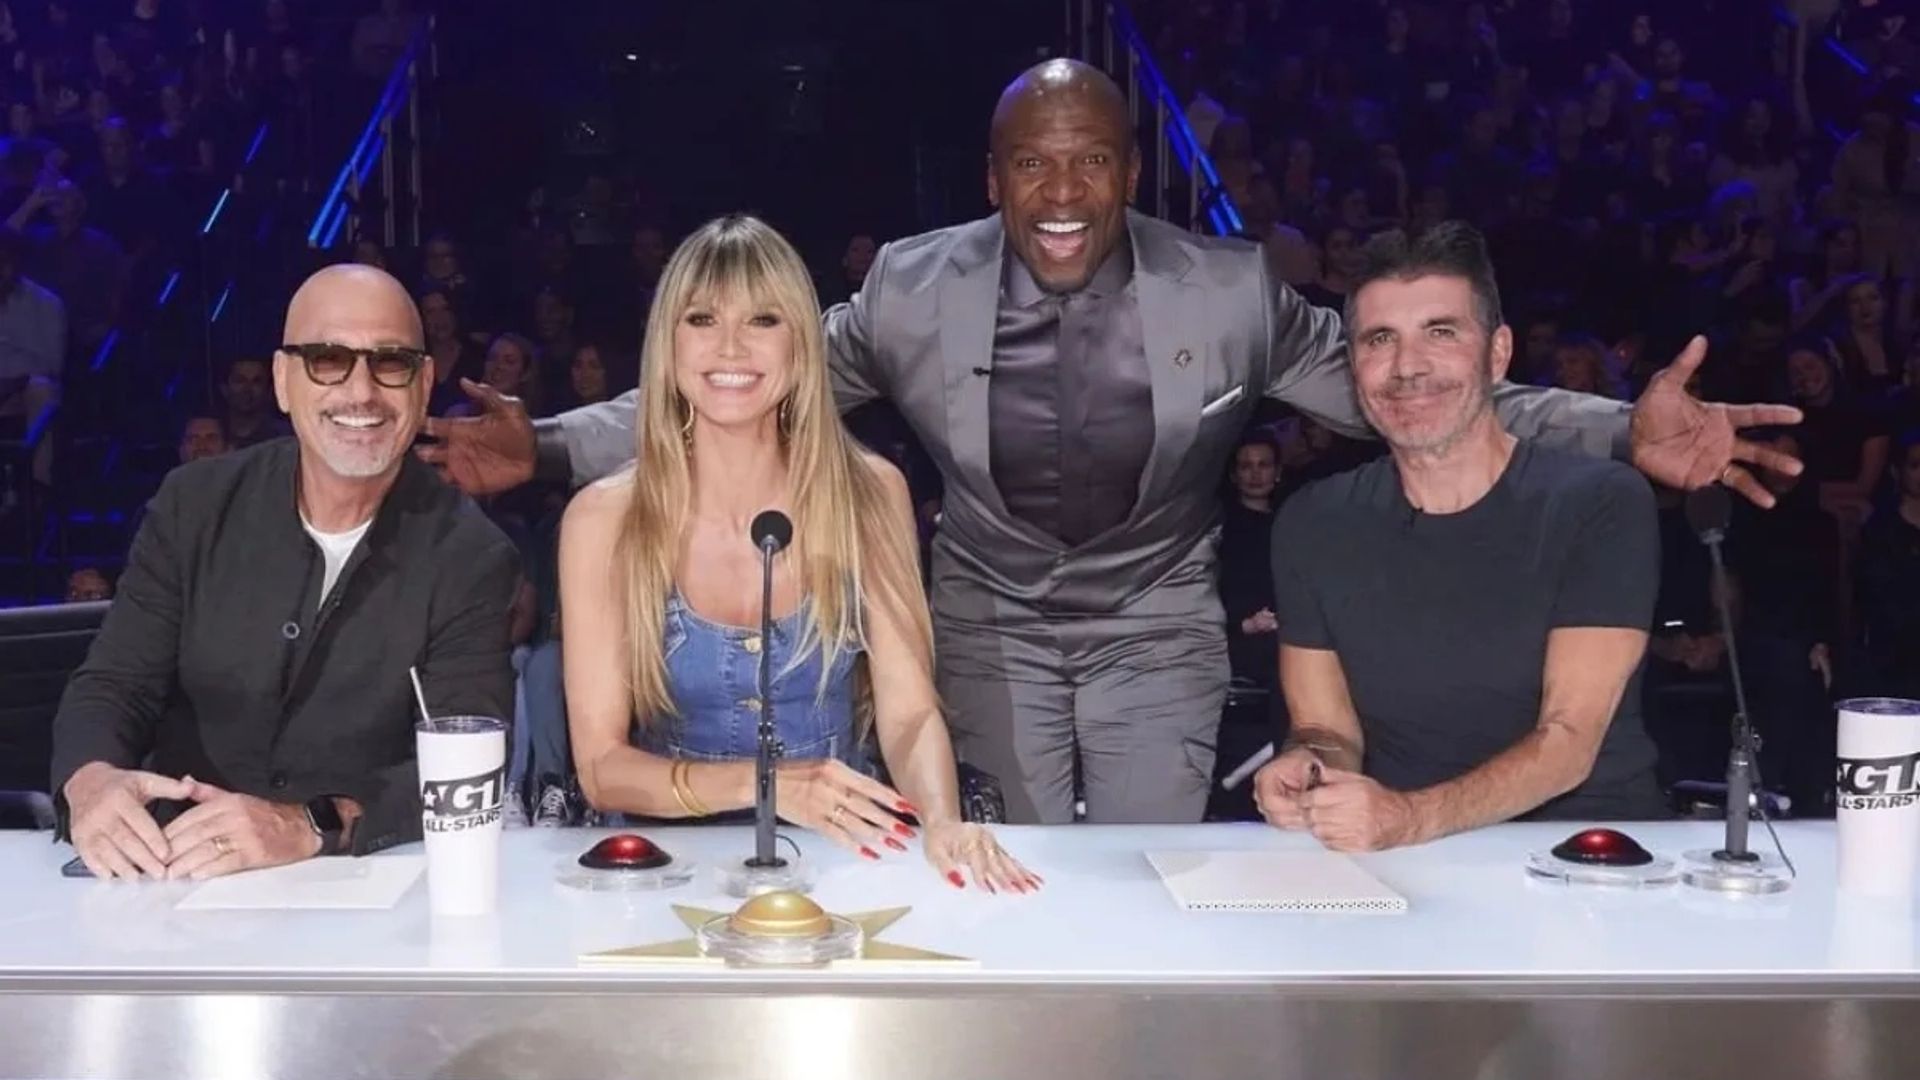 AGT All Stars viewers make same complaint about latest episode here